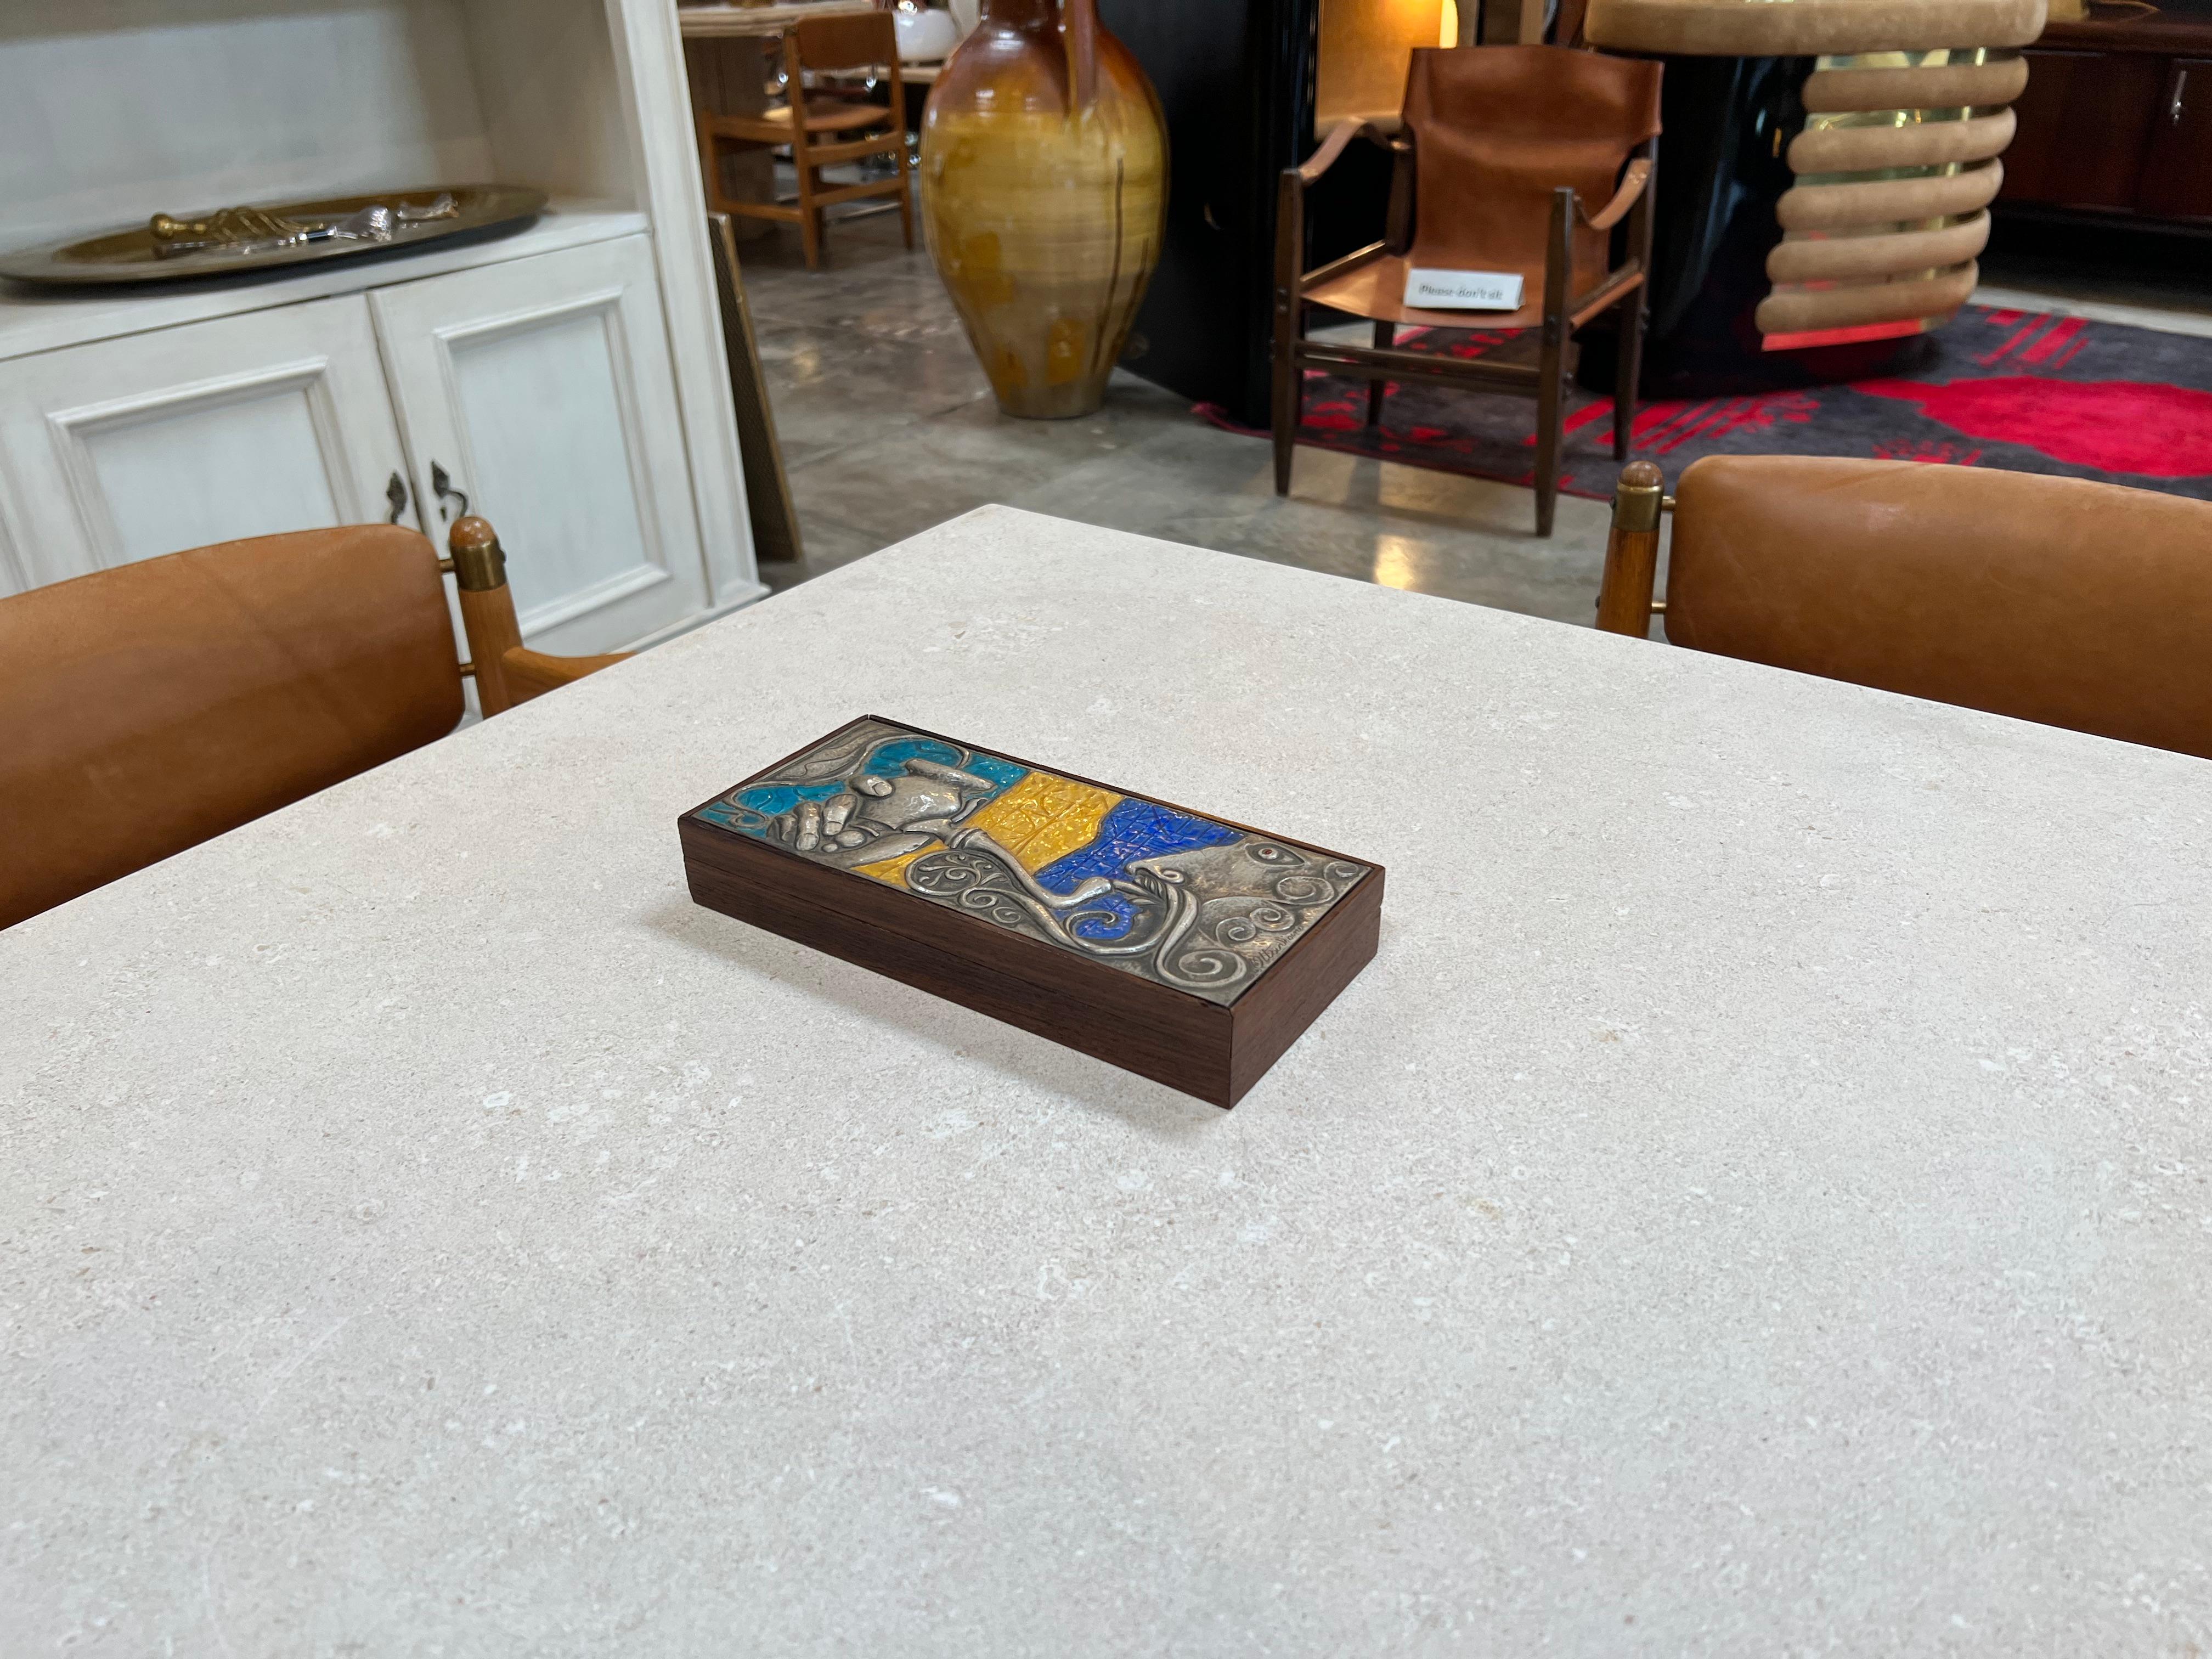 The Vintage Decorative Italian Wood Box from the 1980s is a charming and unique piece featuring a silver metal decoration on the top, adorned with blue and yellow accents. Crafted with exquisite Italian craftsmanship, this box serves as both a